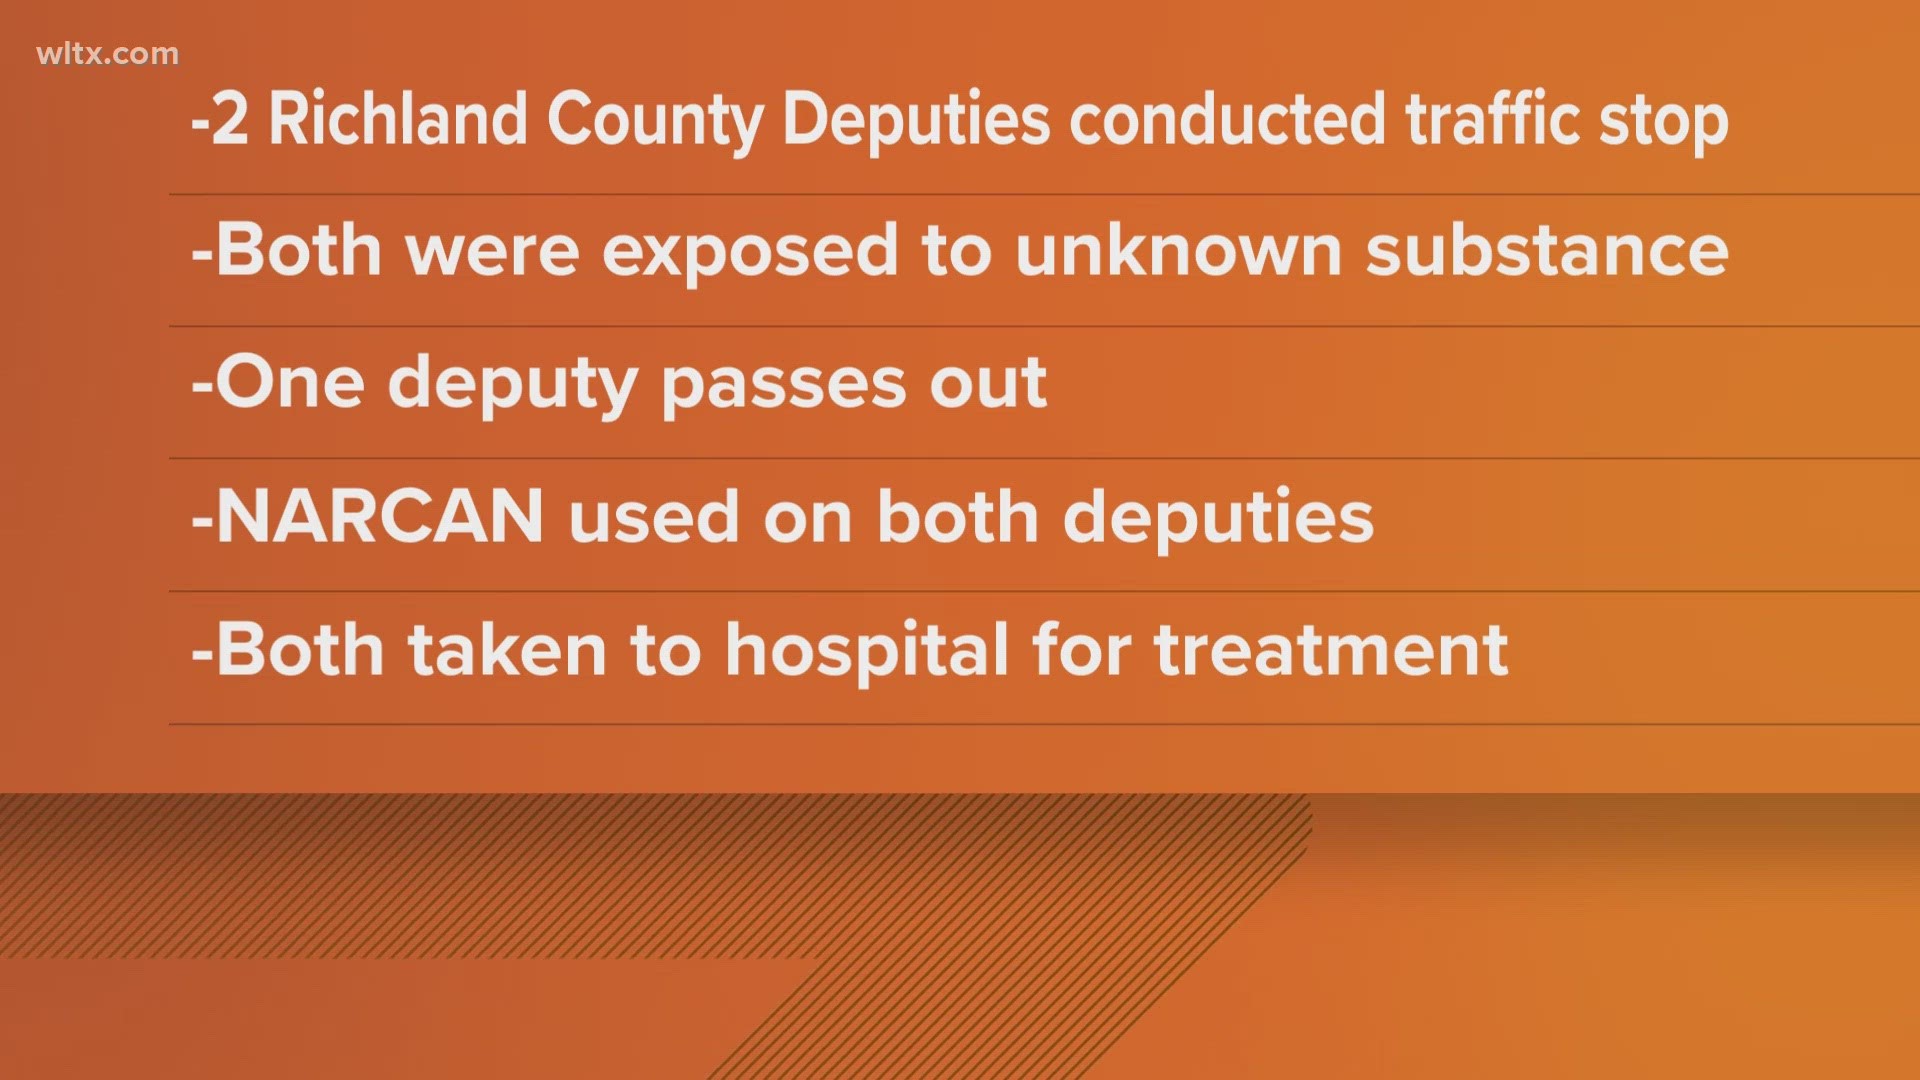 Both the deputy who fell unconscious and another who rushed in to help were given NARCAN, a drug used to reverse known or suspected opioid overdoses.